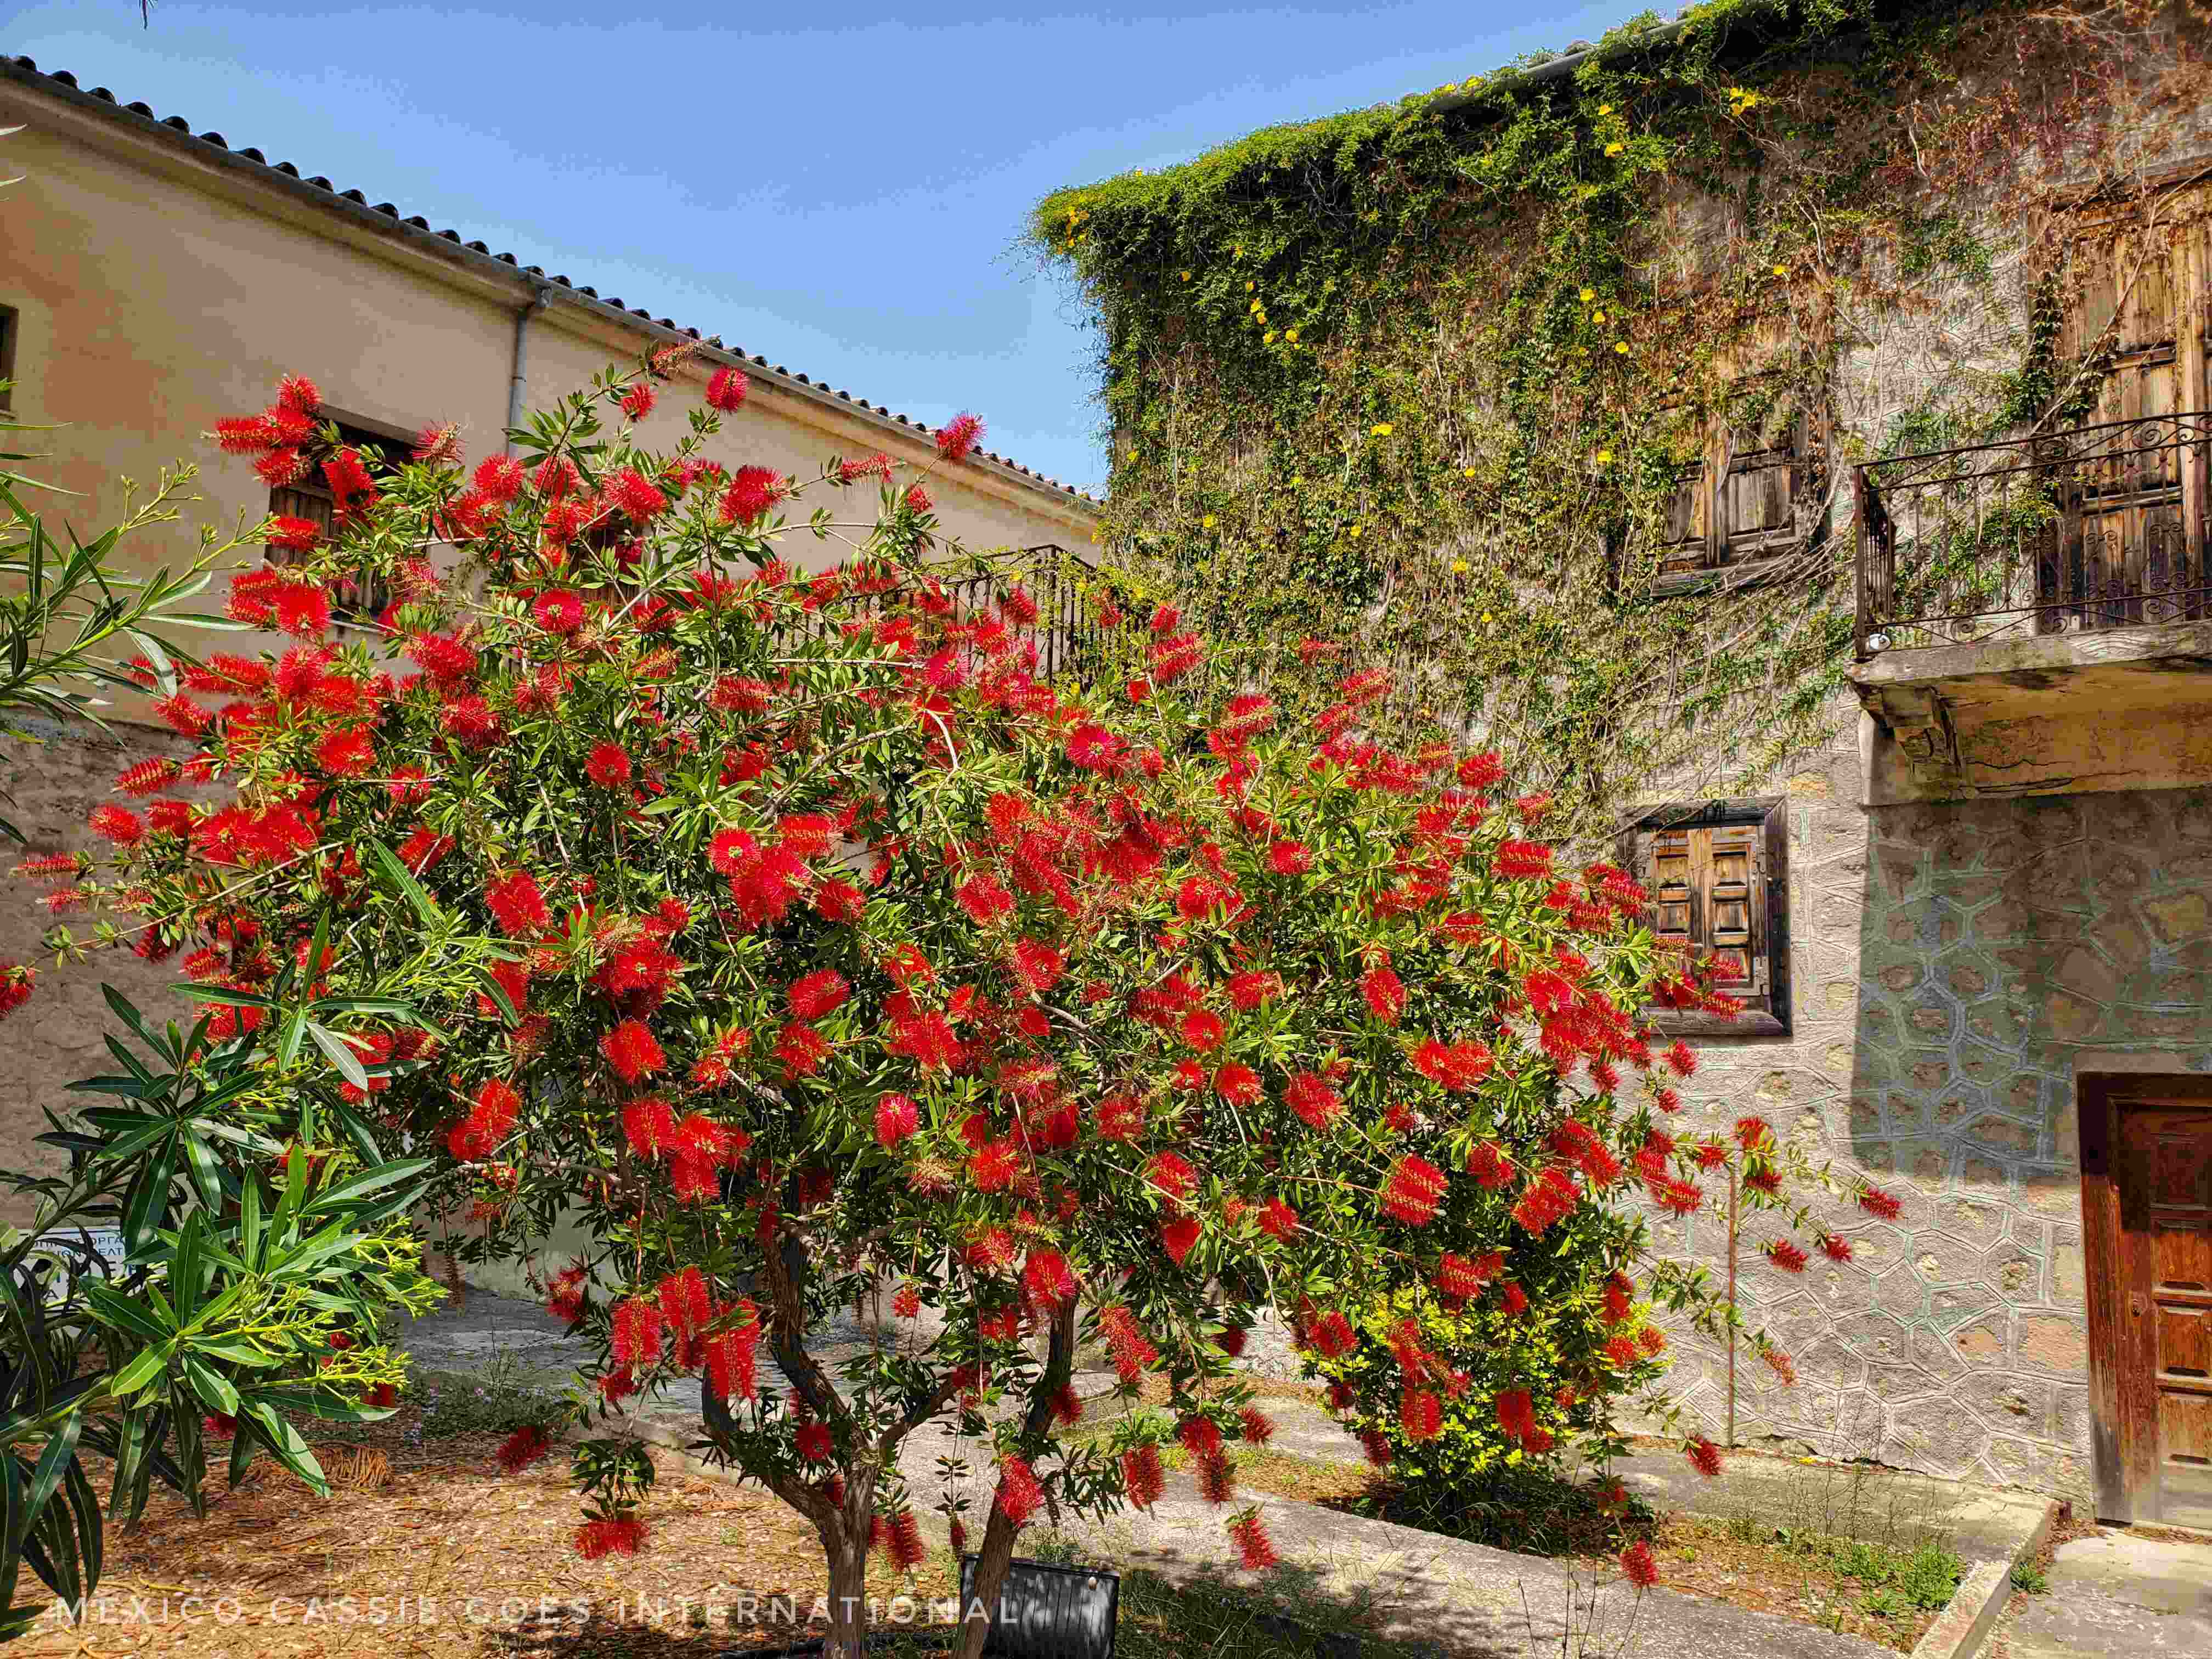 mid-sized tree covered in red flowers in front of 2 storey house